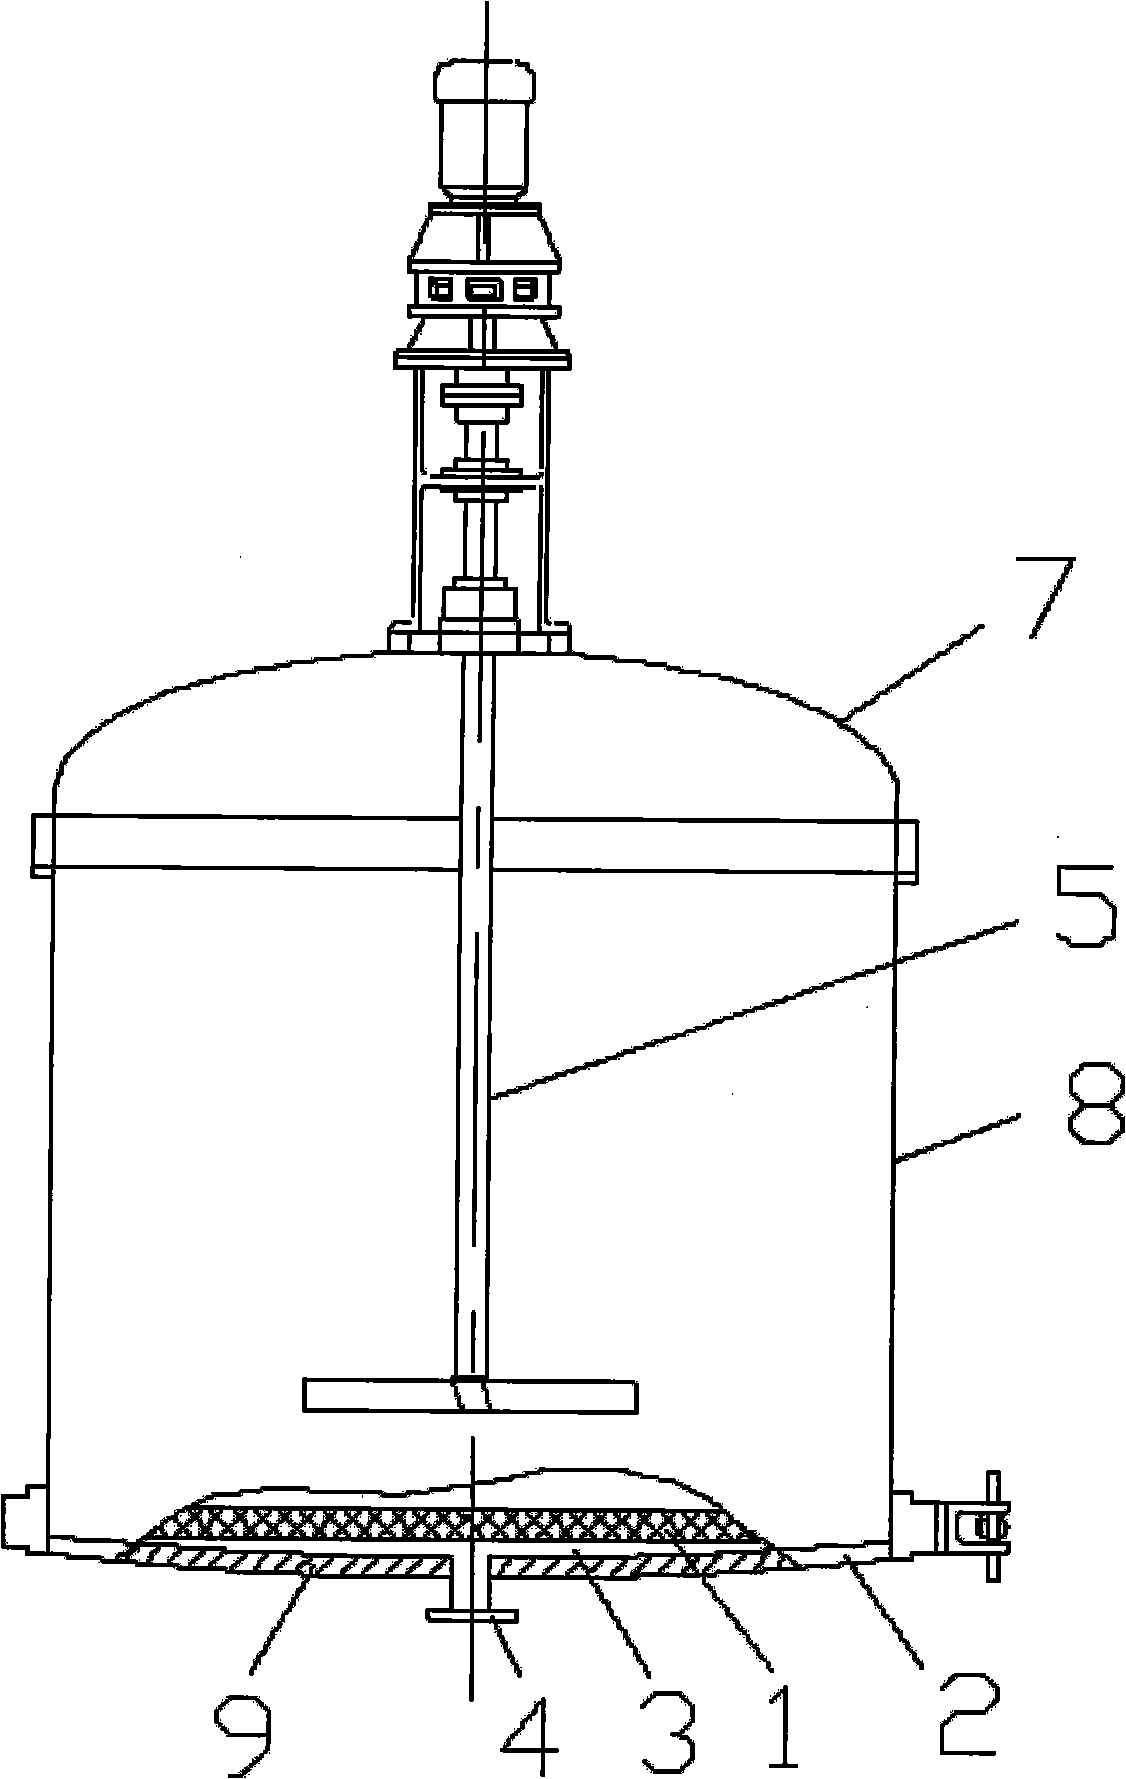 Reaction and solid-liquid separation integrated device